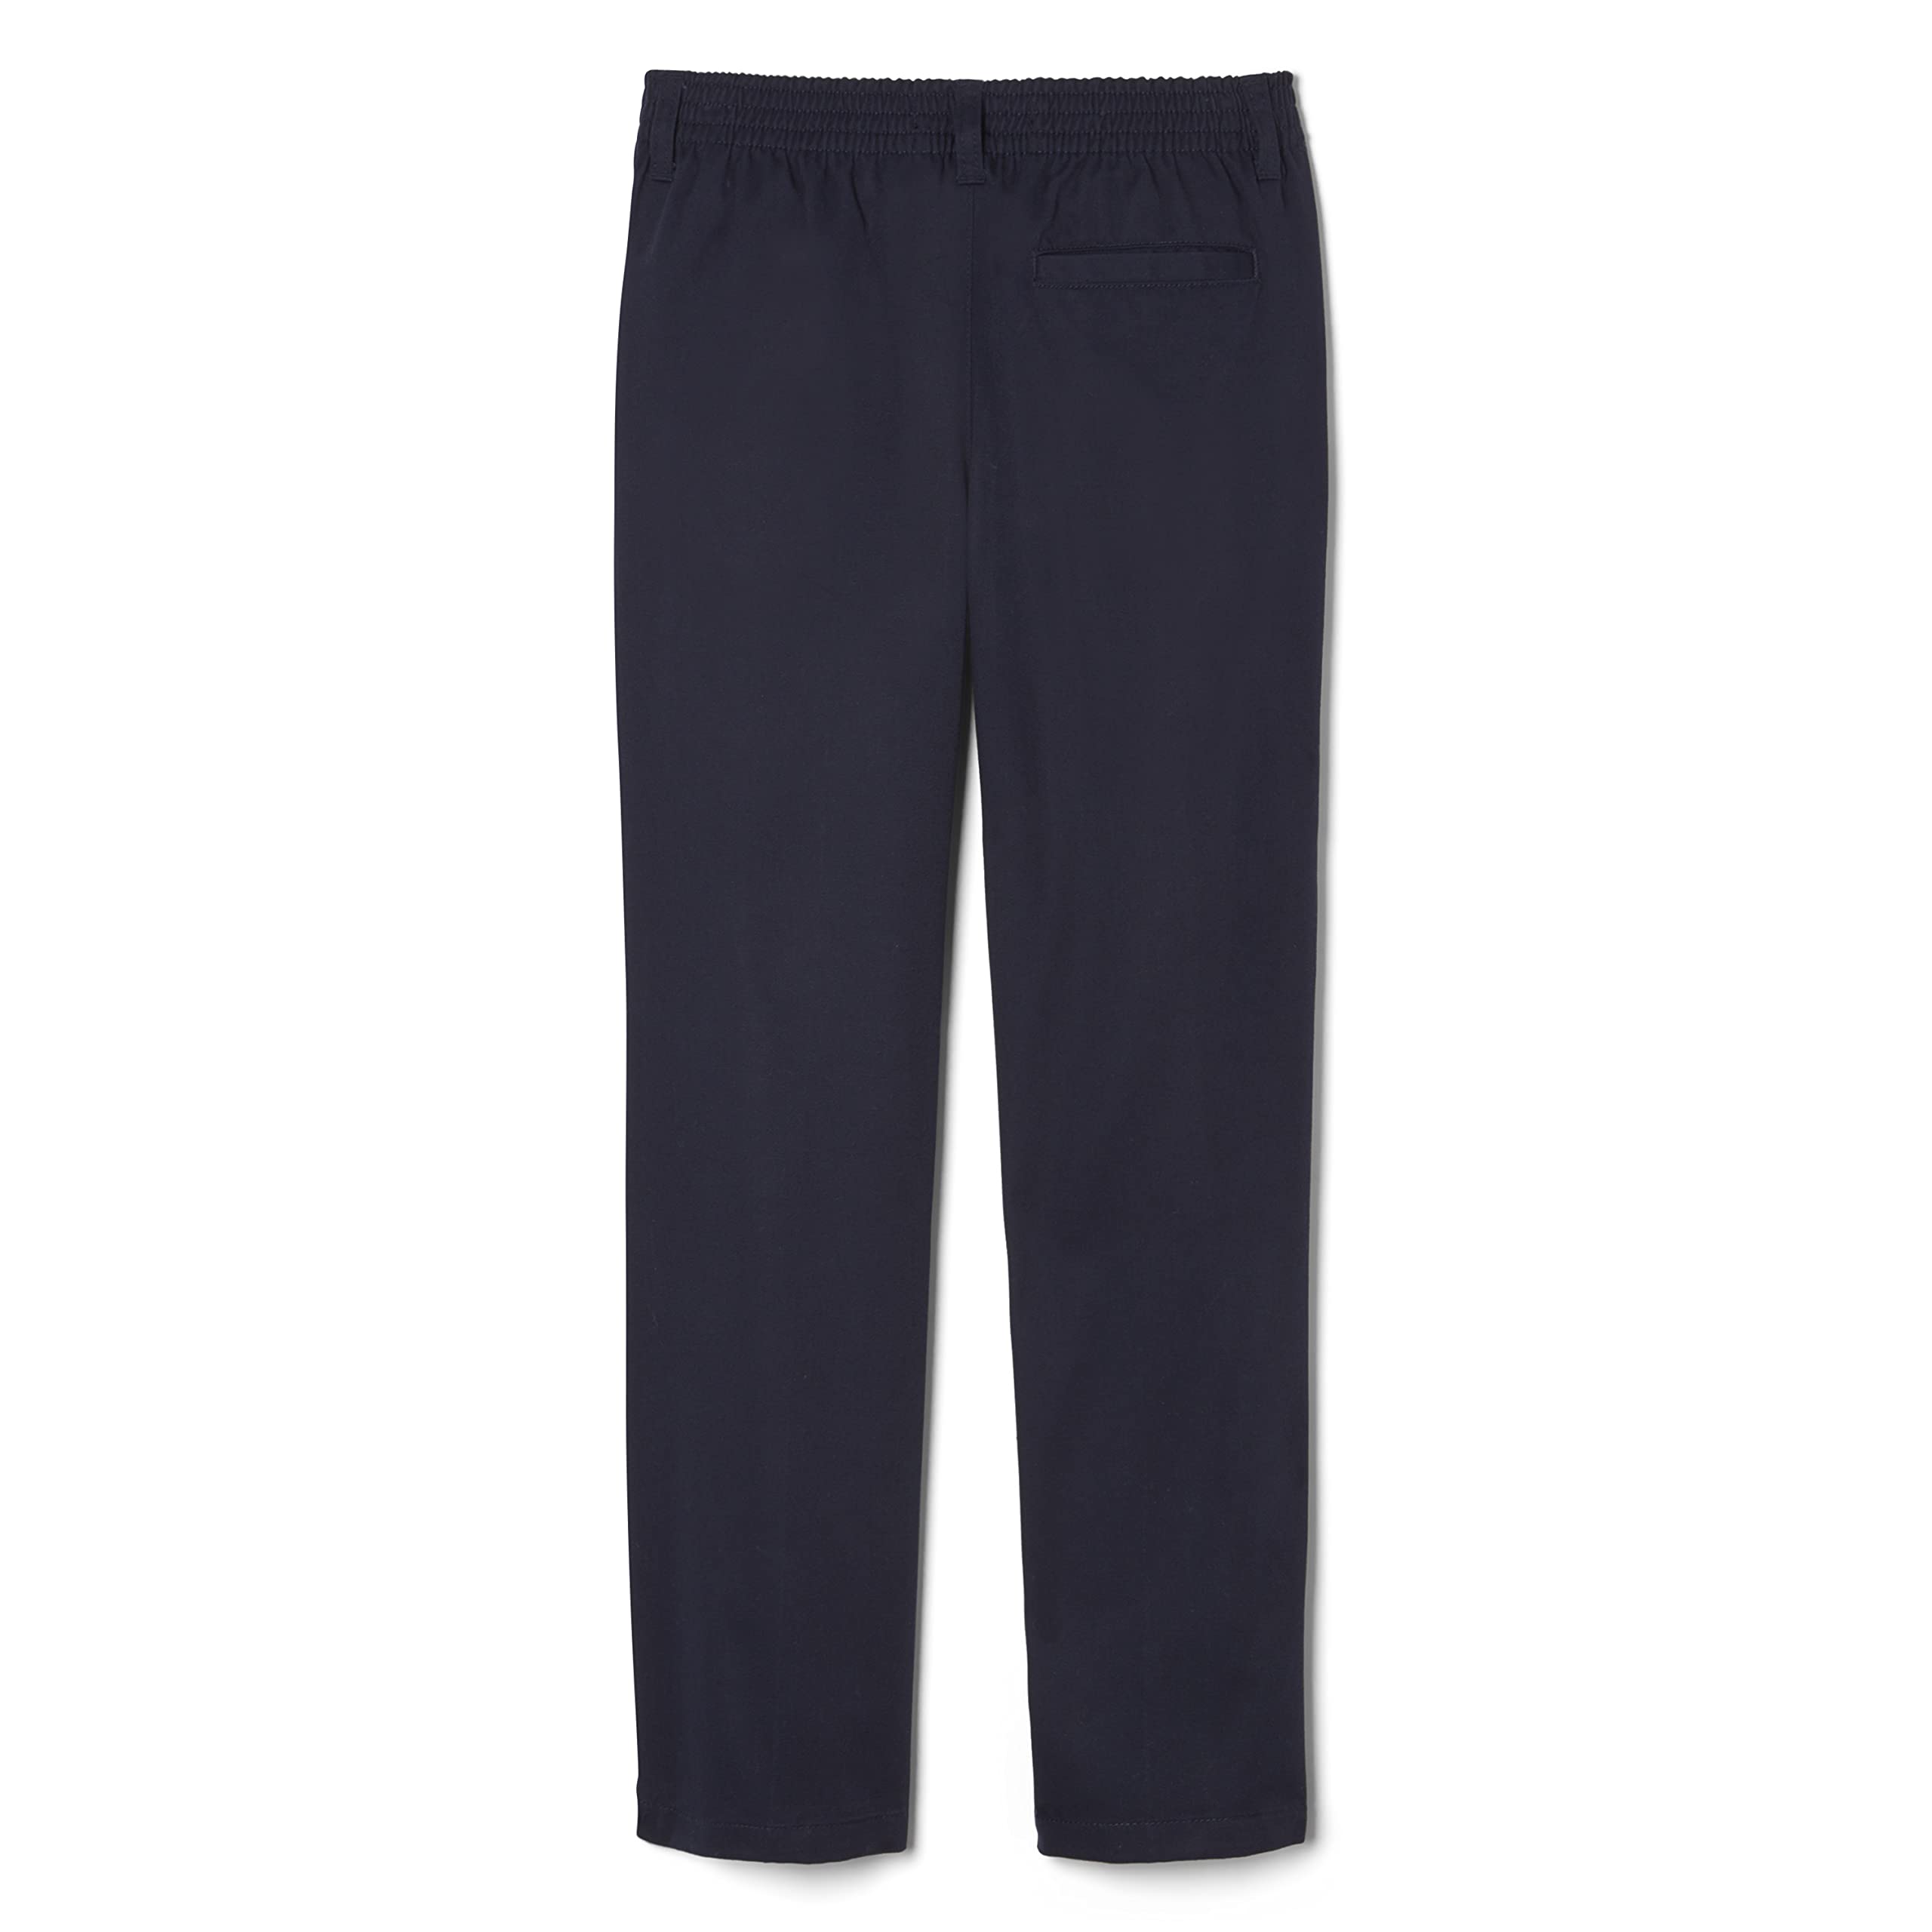 French Toast Boys' Big Pull-On Relaxed Fit School Uniform Pant